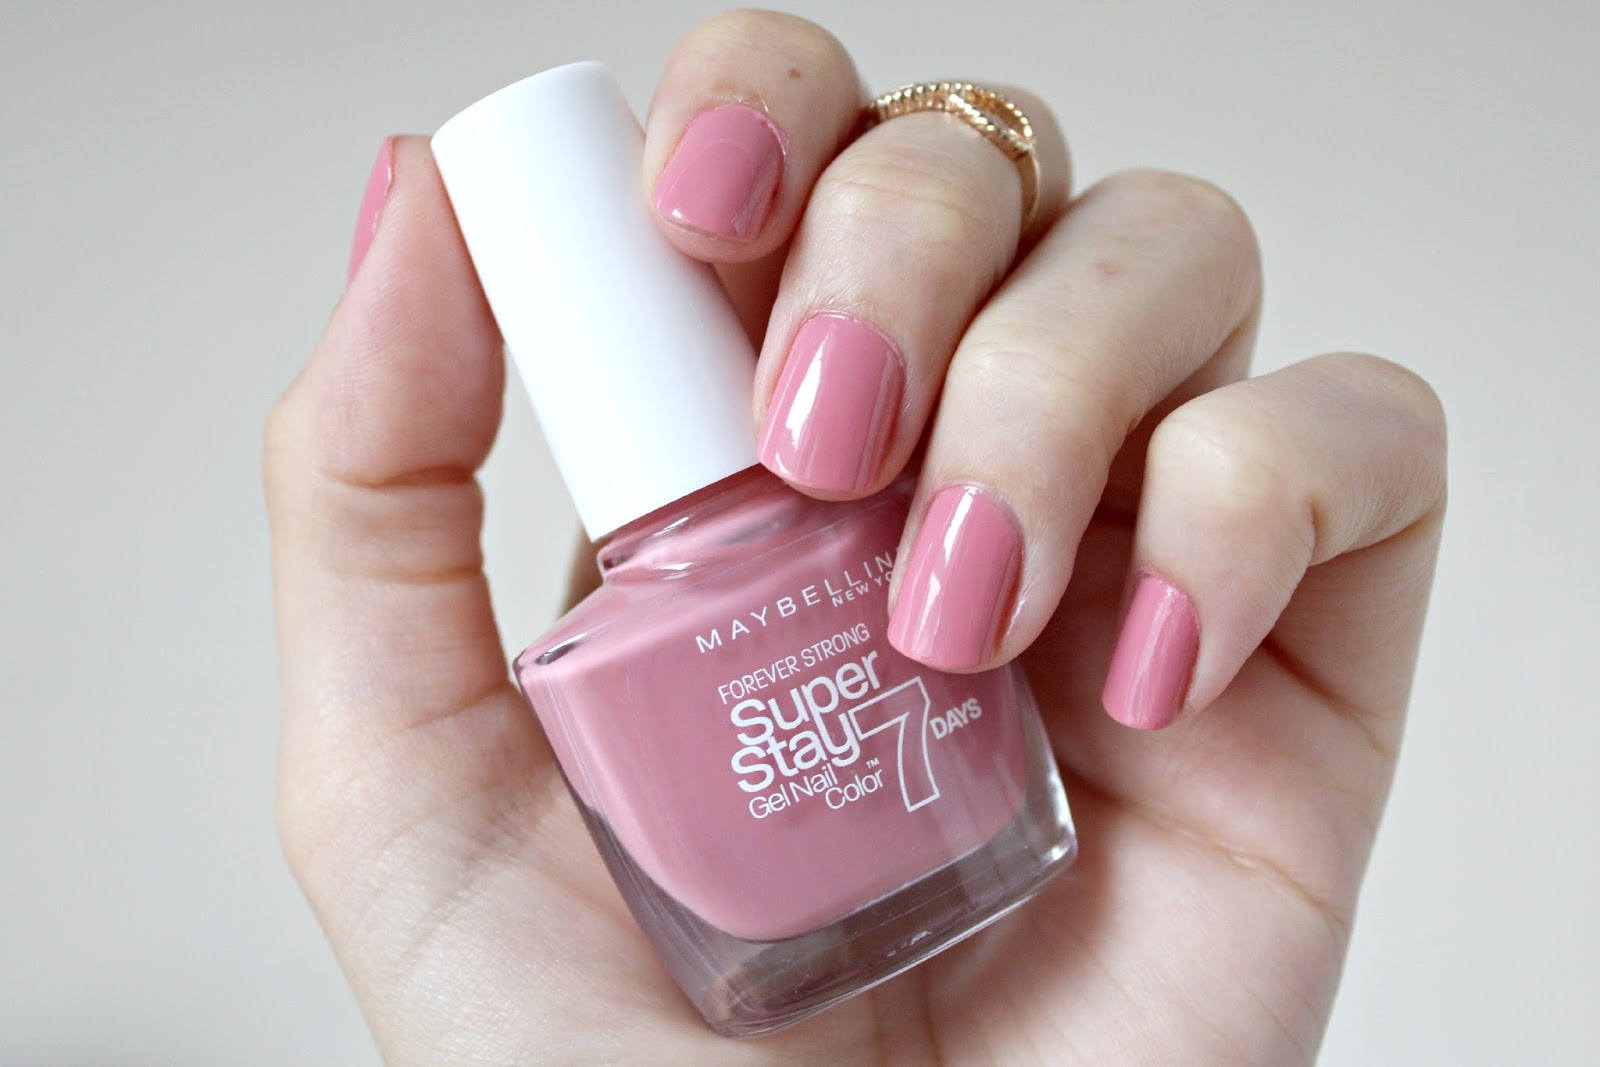 5. Maybelline SuperStay 7 Days Gel Nail Polish - wide 11